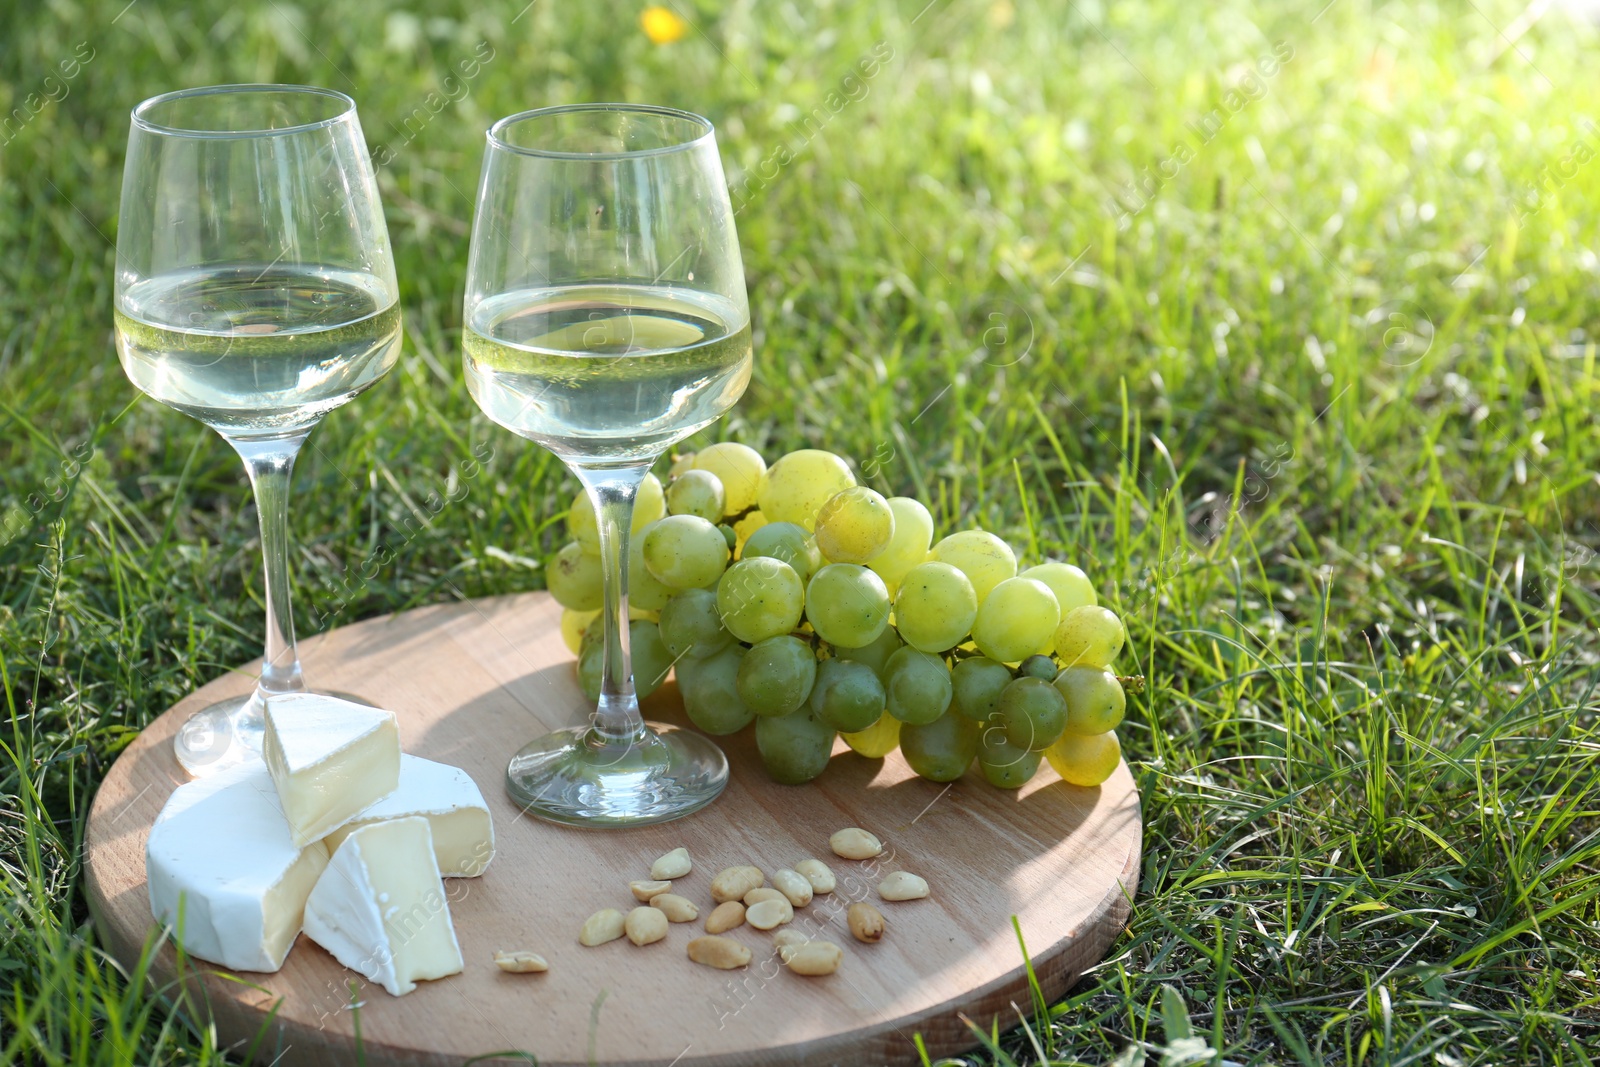 Photo of Two glasses of delicious white wine, grapes, cheese and nuts on green grass outdoors. Space for text